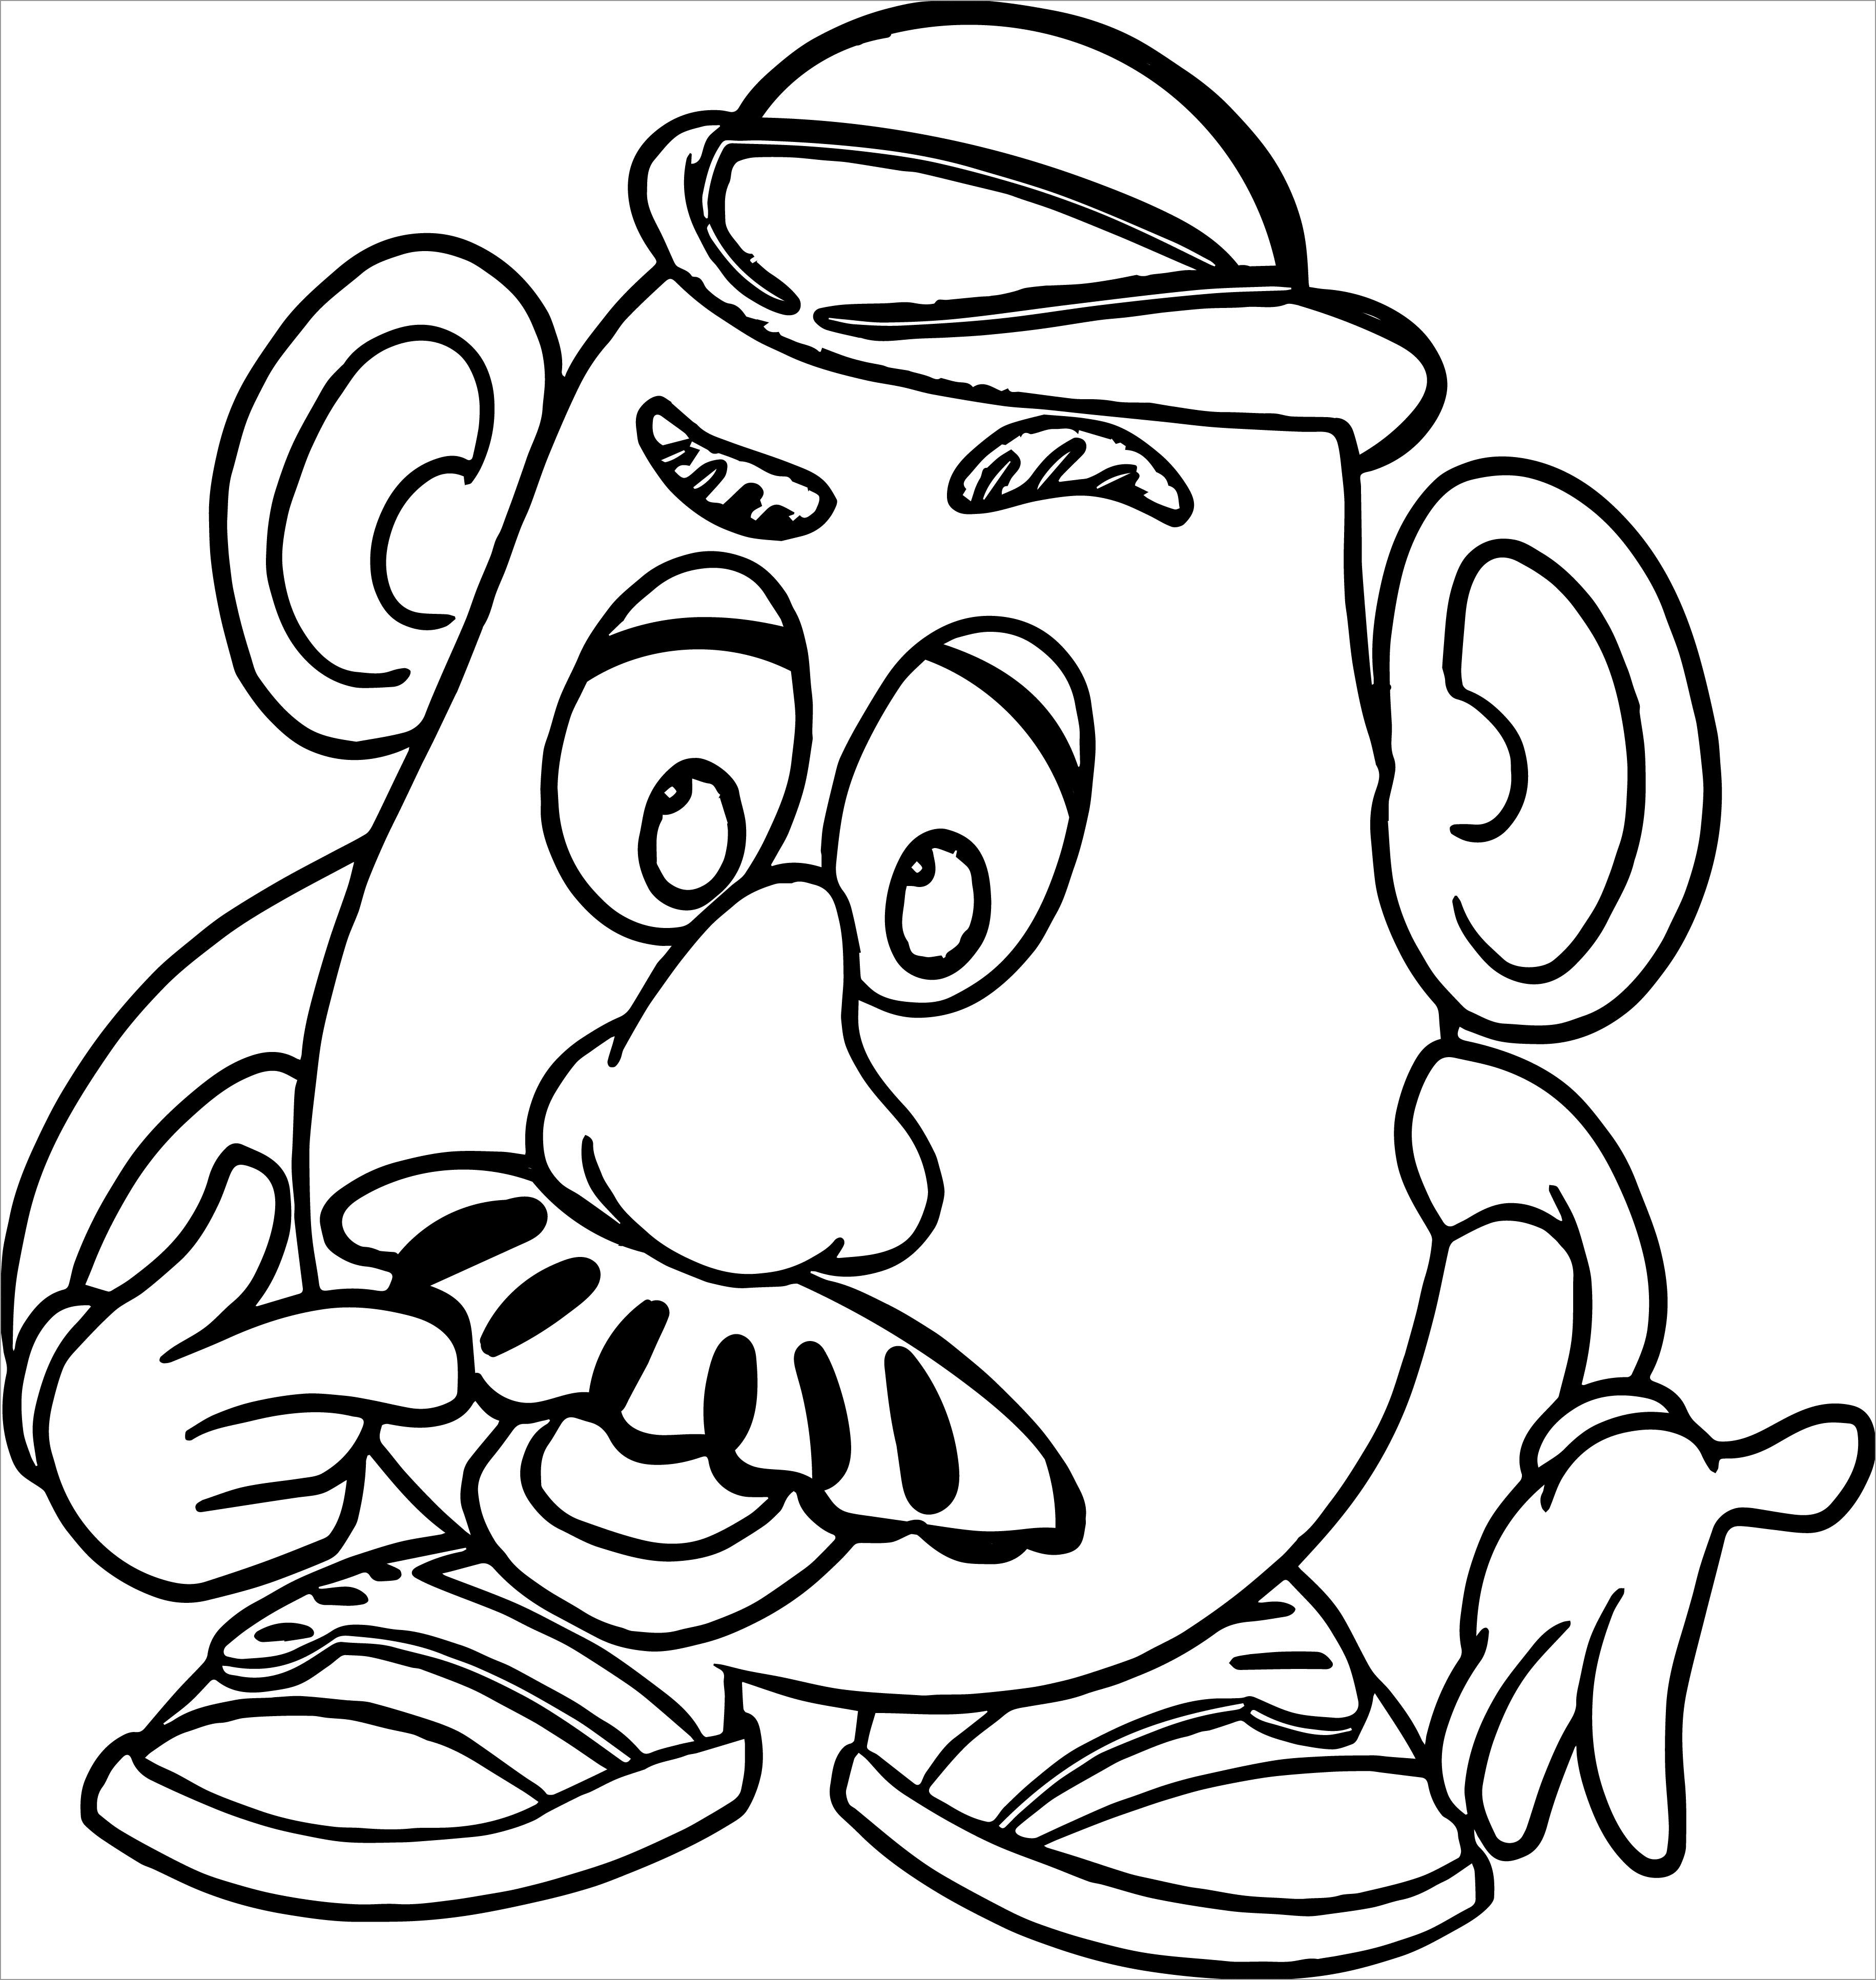 Mr Potato Head Coloring Page for Kids